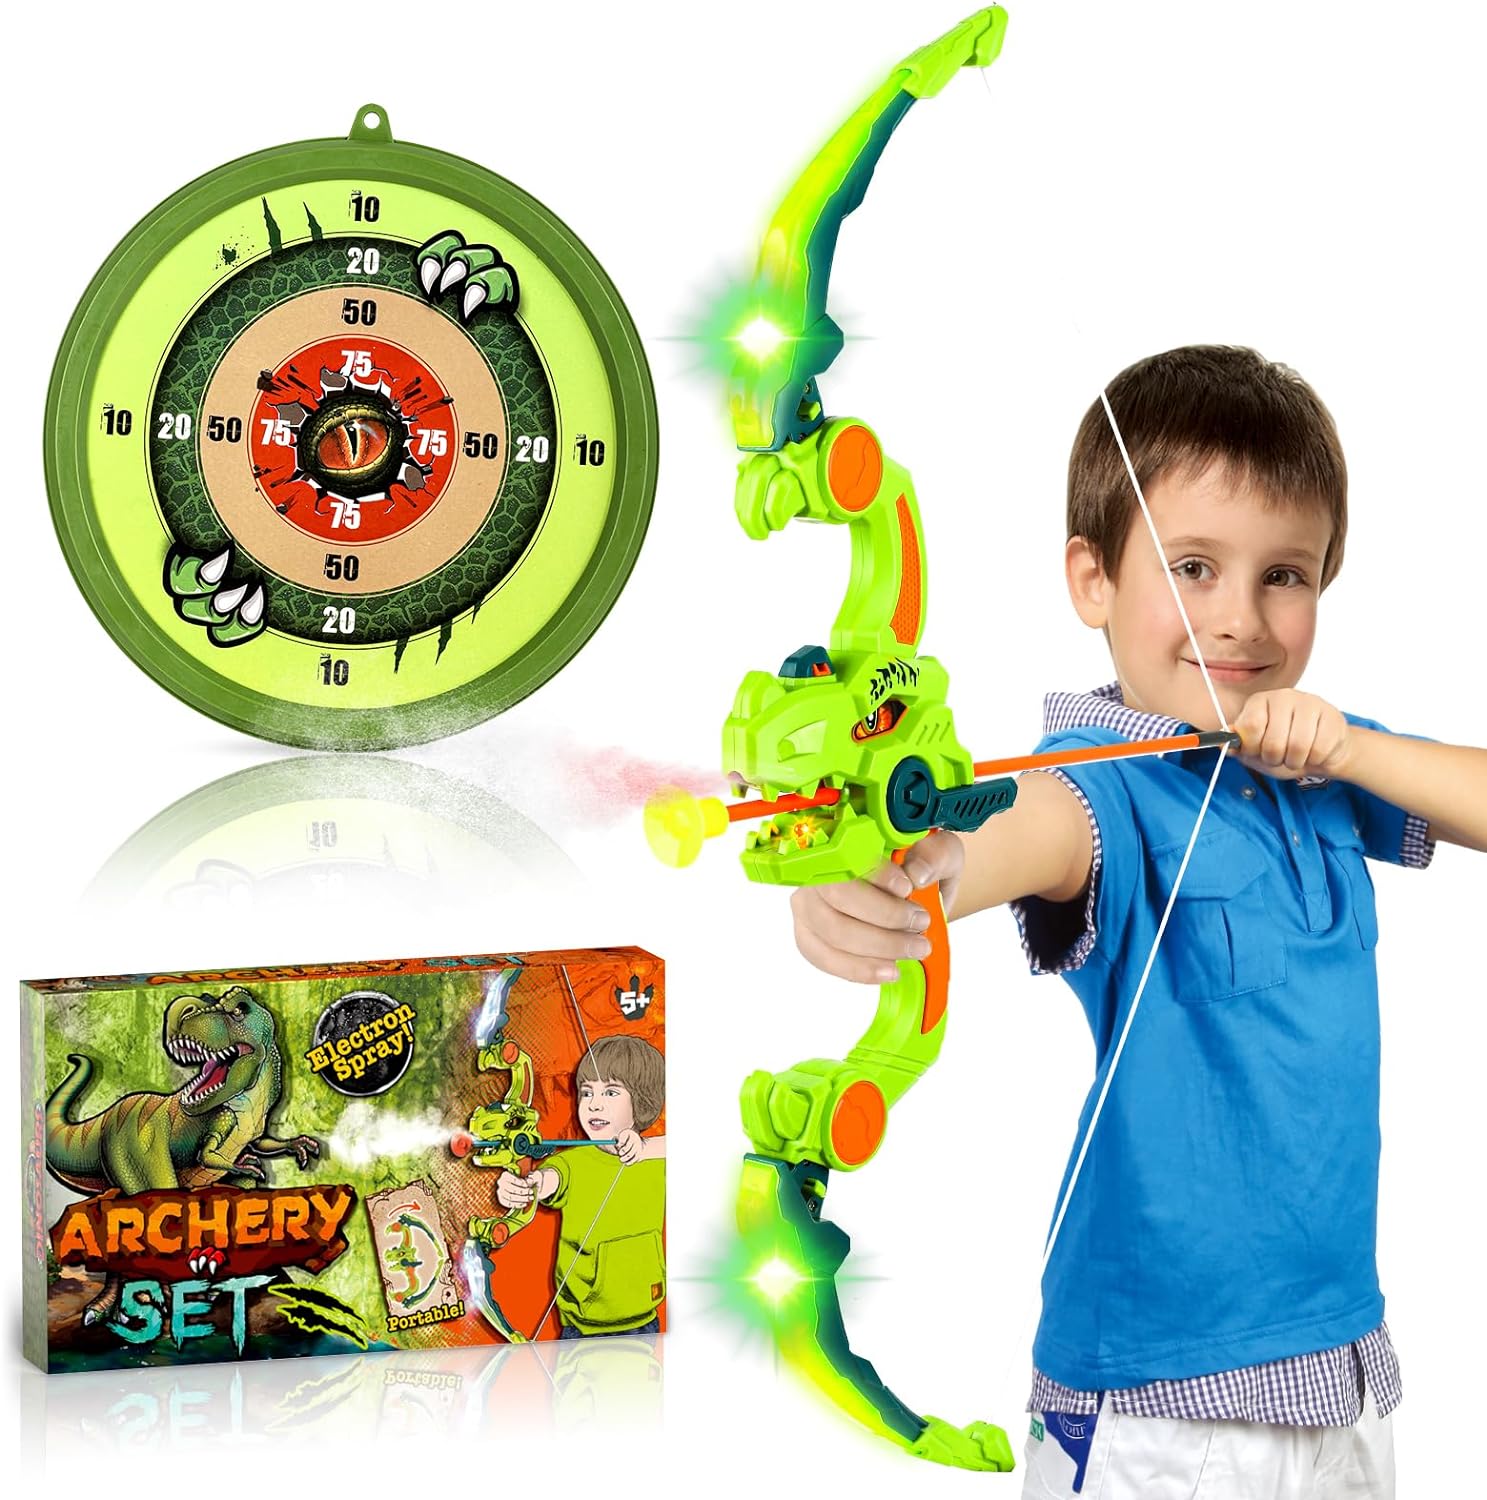 Fuwidvia Dinosaur Bow and Arrow, Kids Bow and Arrow Set with LED Lights & Water Spray, Archery Set with 8 Suction Cup Arrows & Hanging Target, Summer Outdoor Kids Toys for Boys Girls Ages 4-12 Gifts